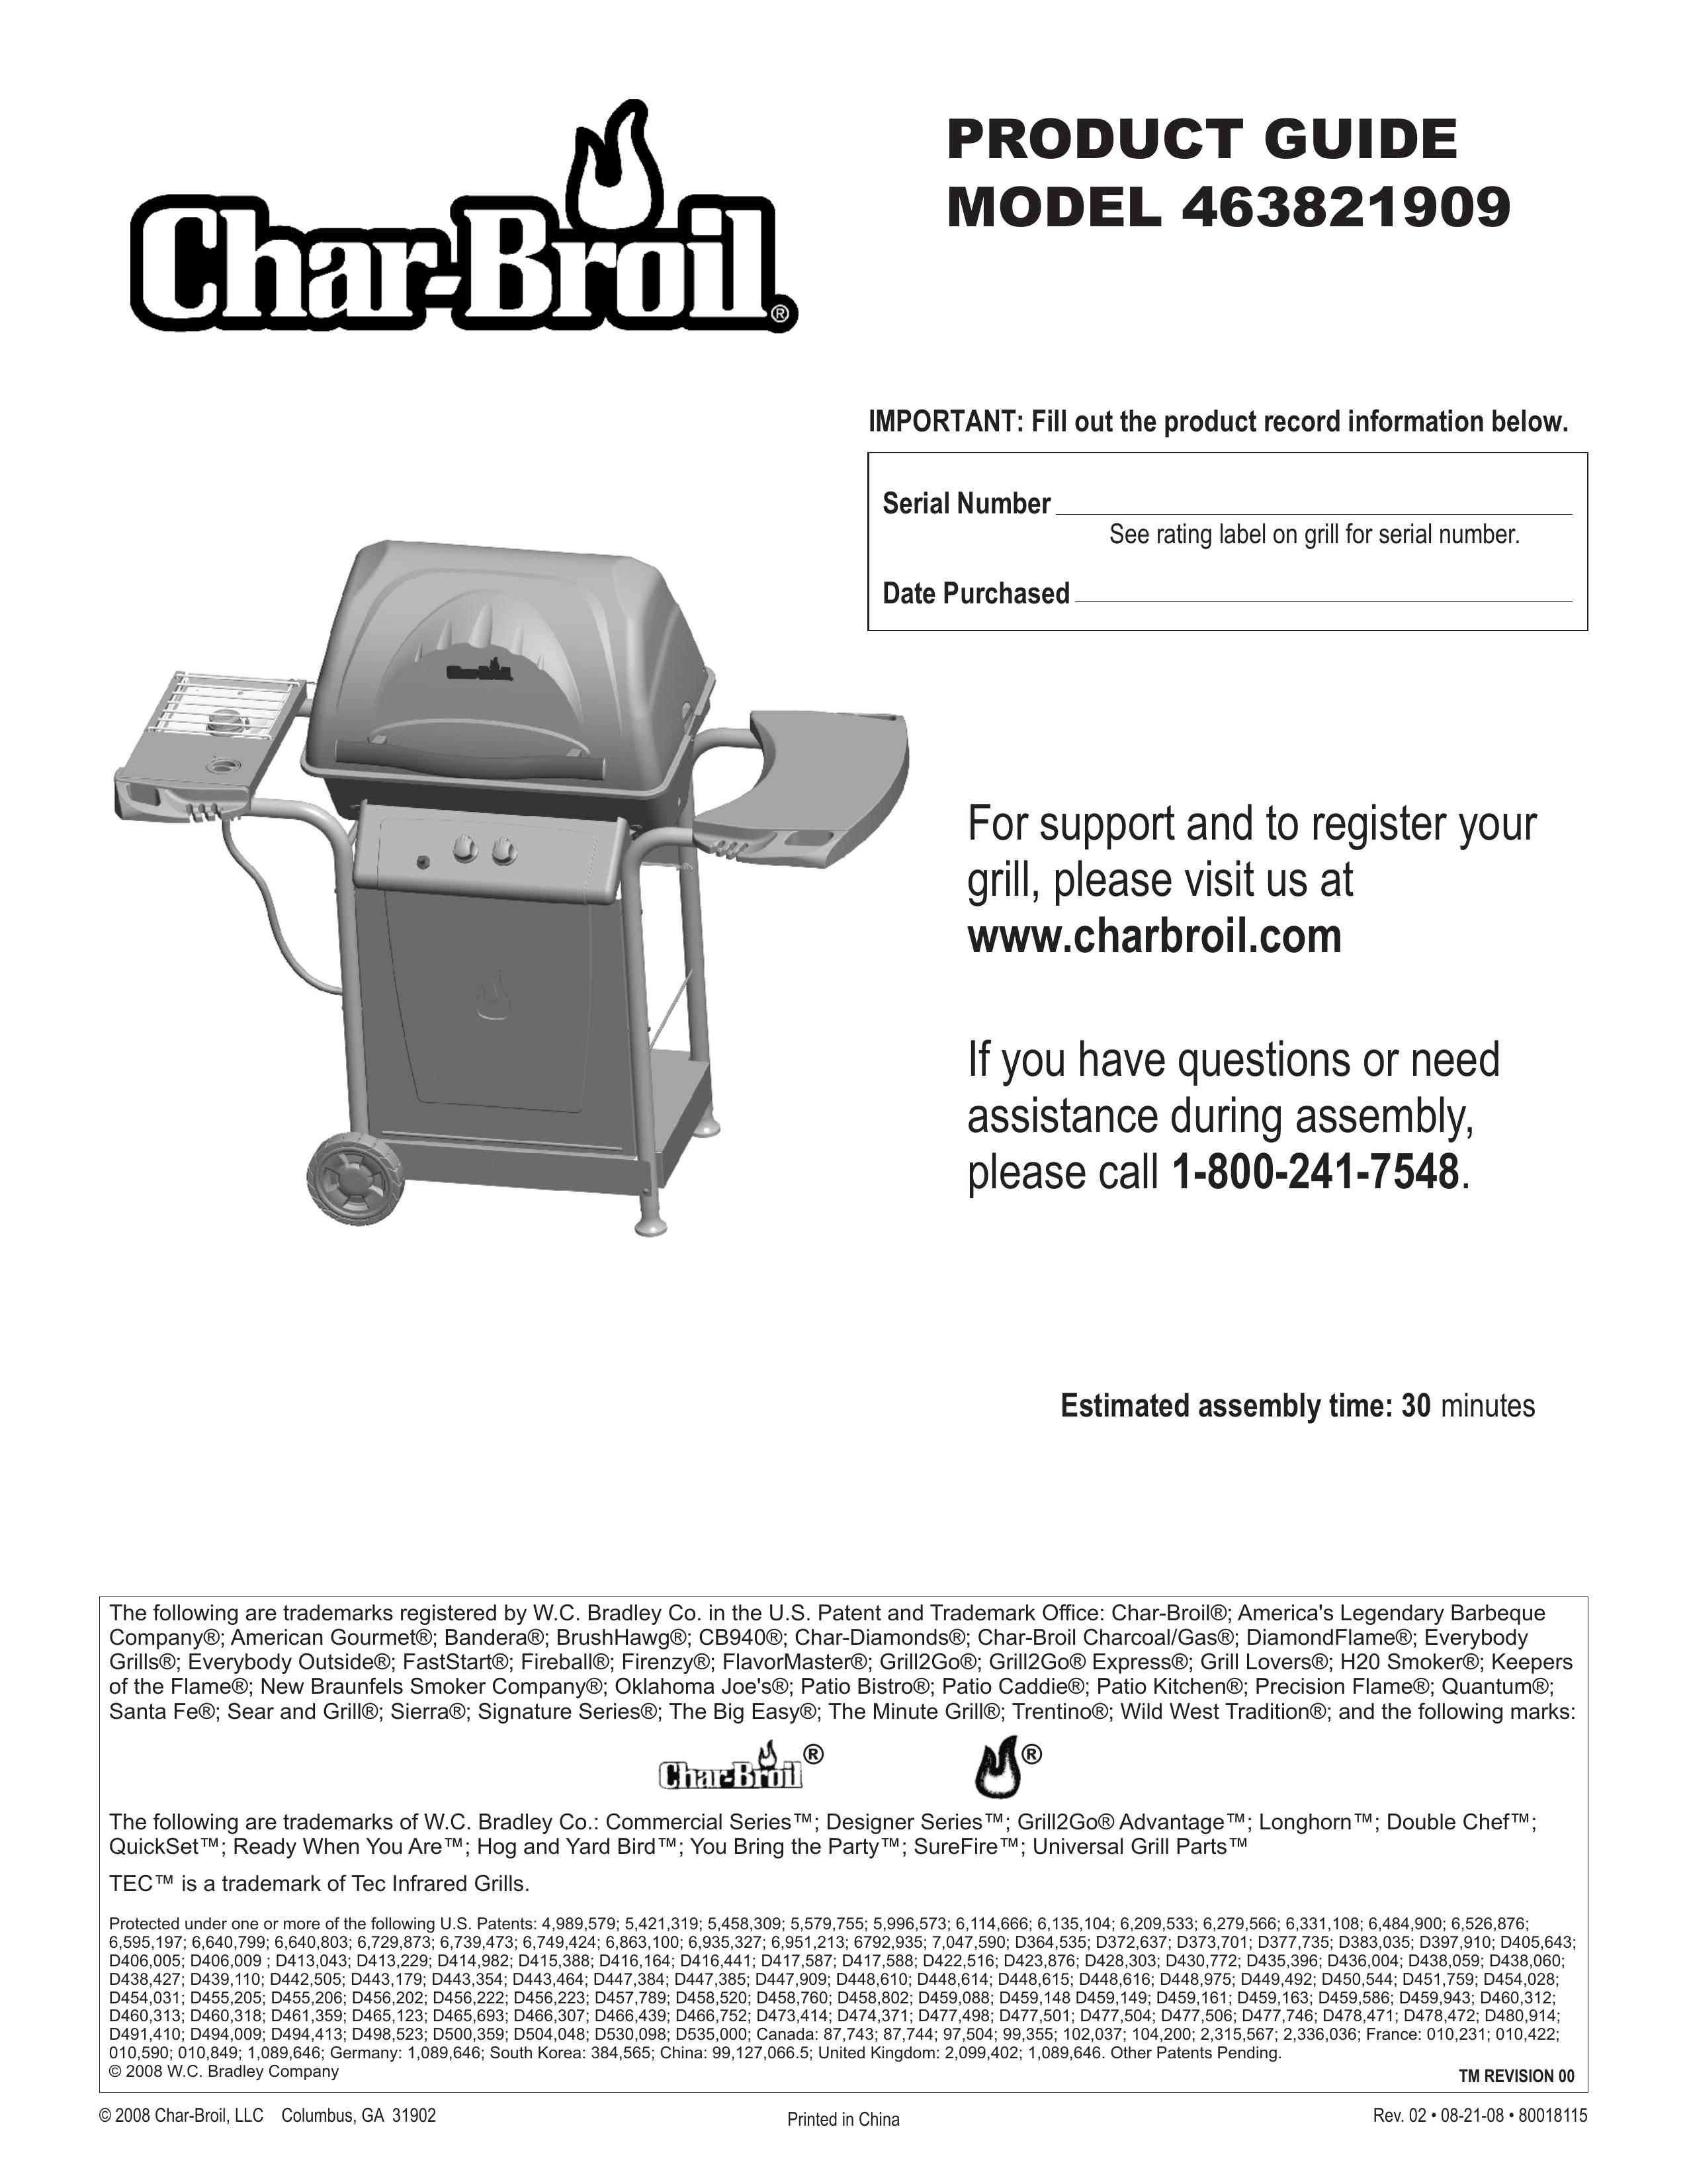 Char-Broil 463821909 Gas Grill User Manual